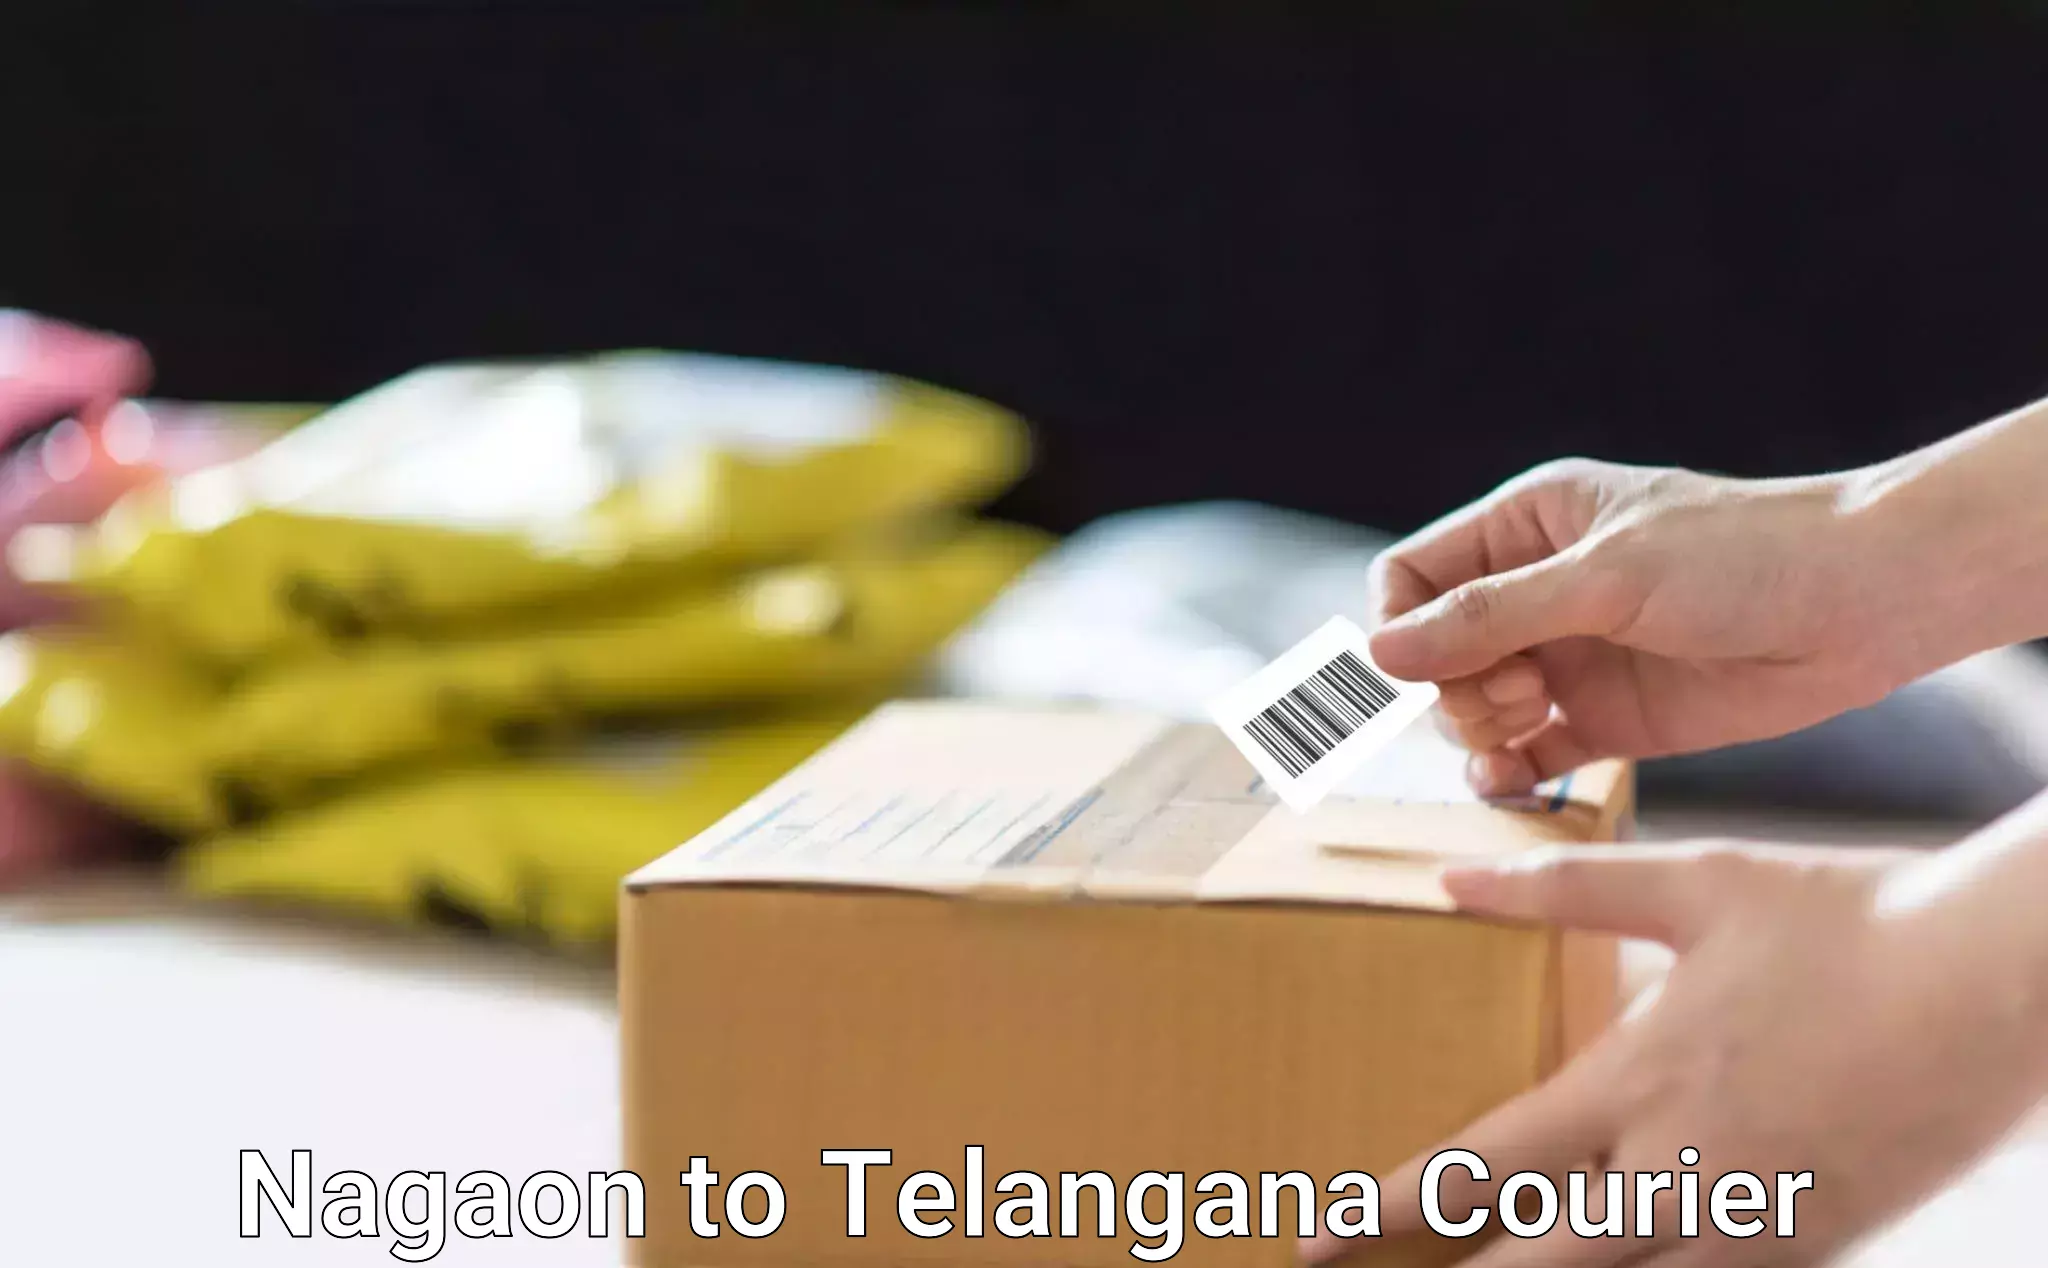 Professional courier handling Nagaon to Wanaparthy